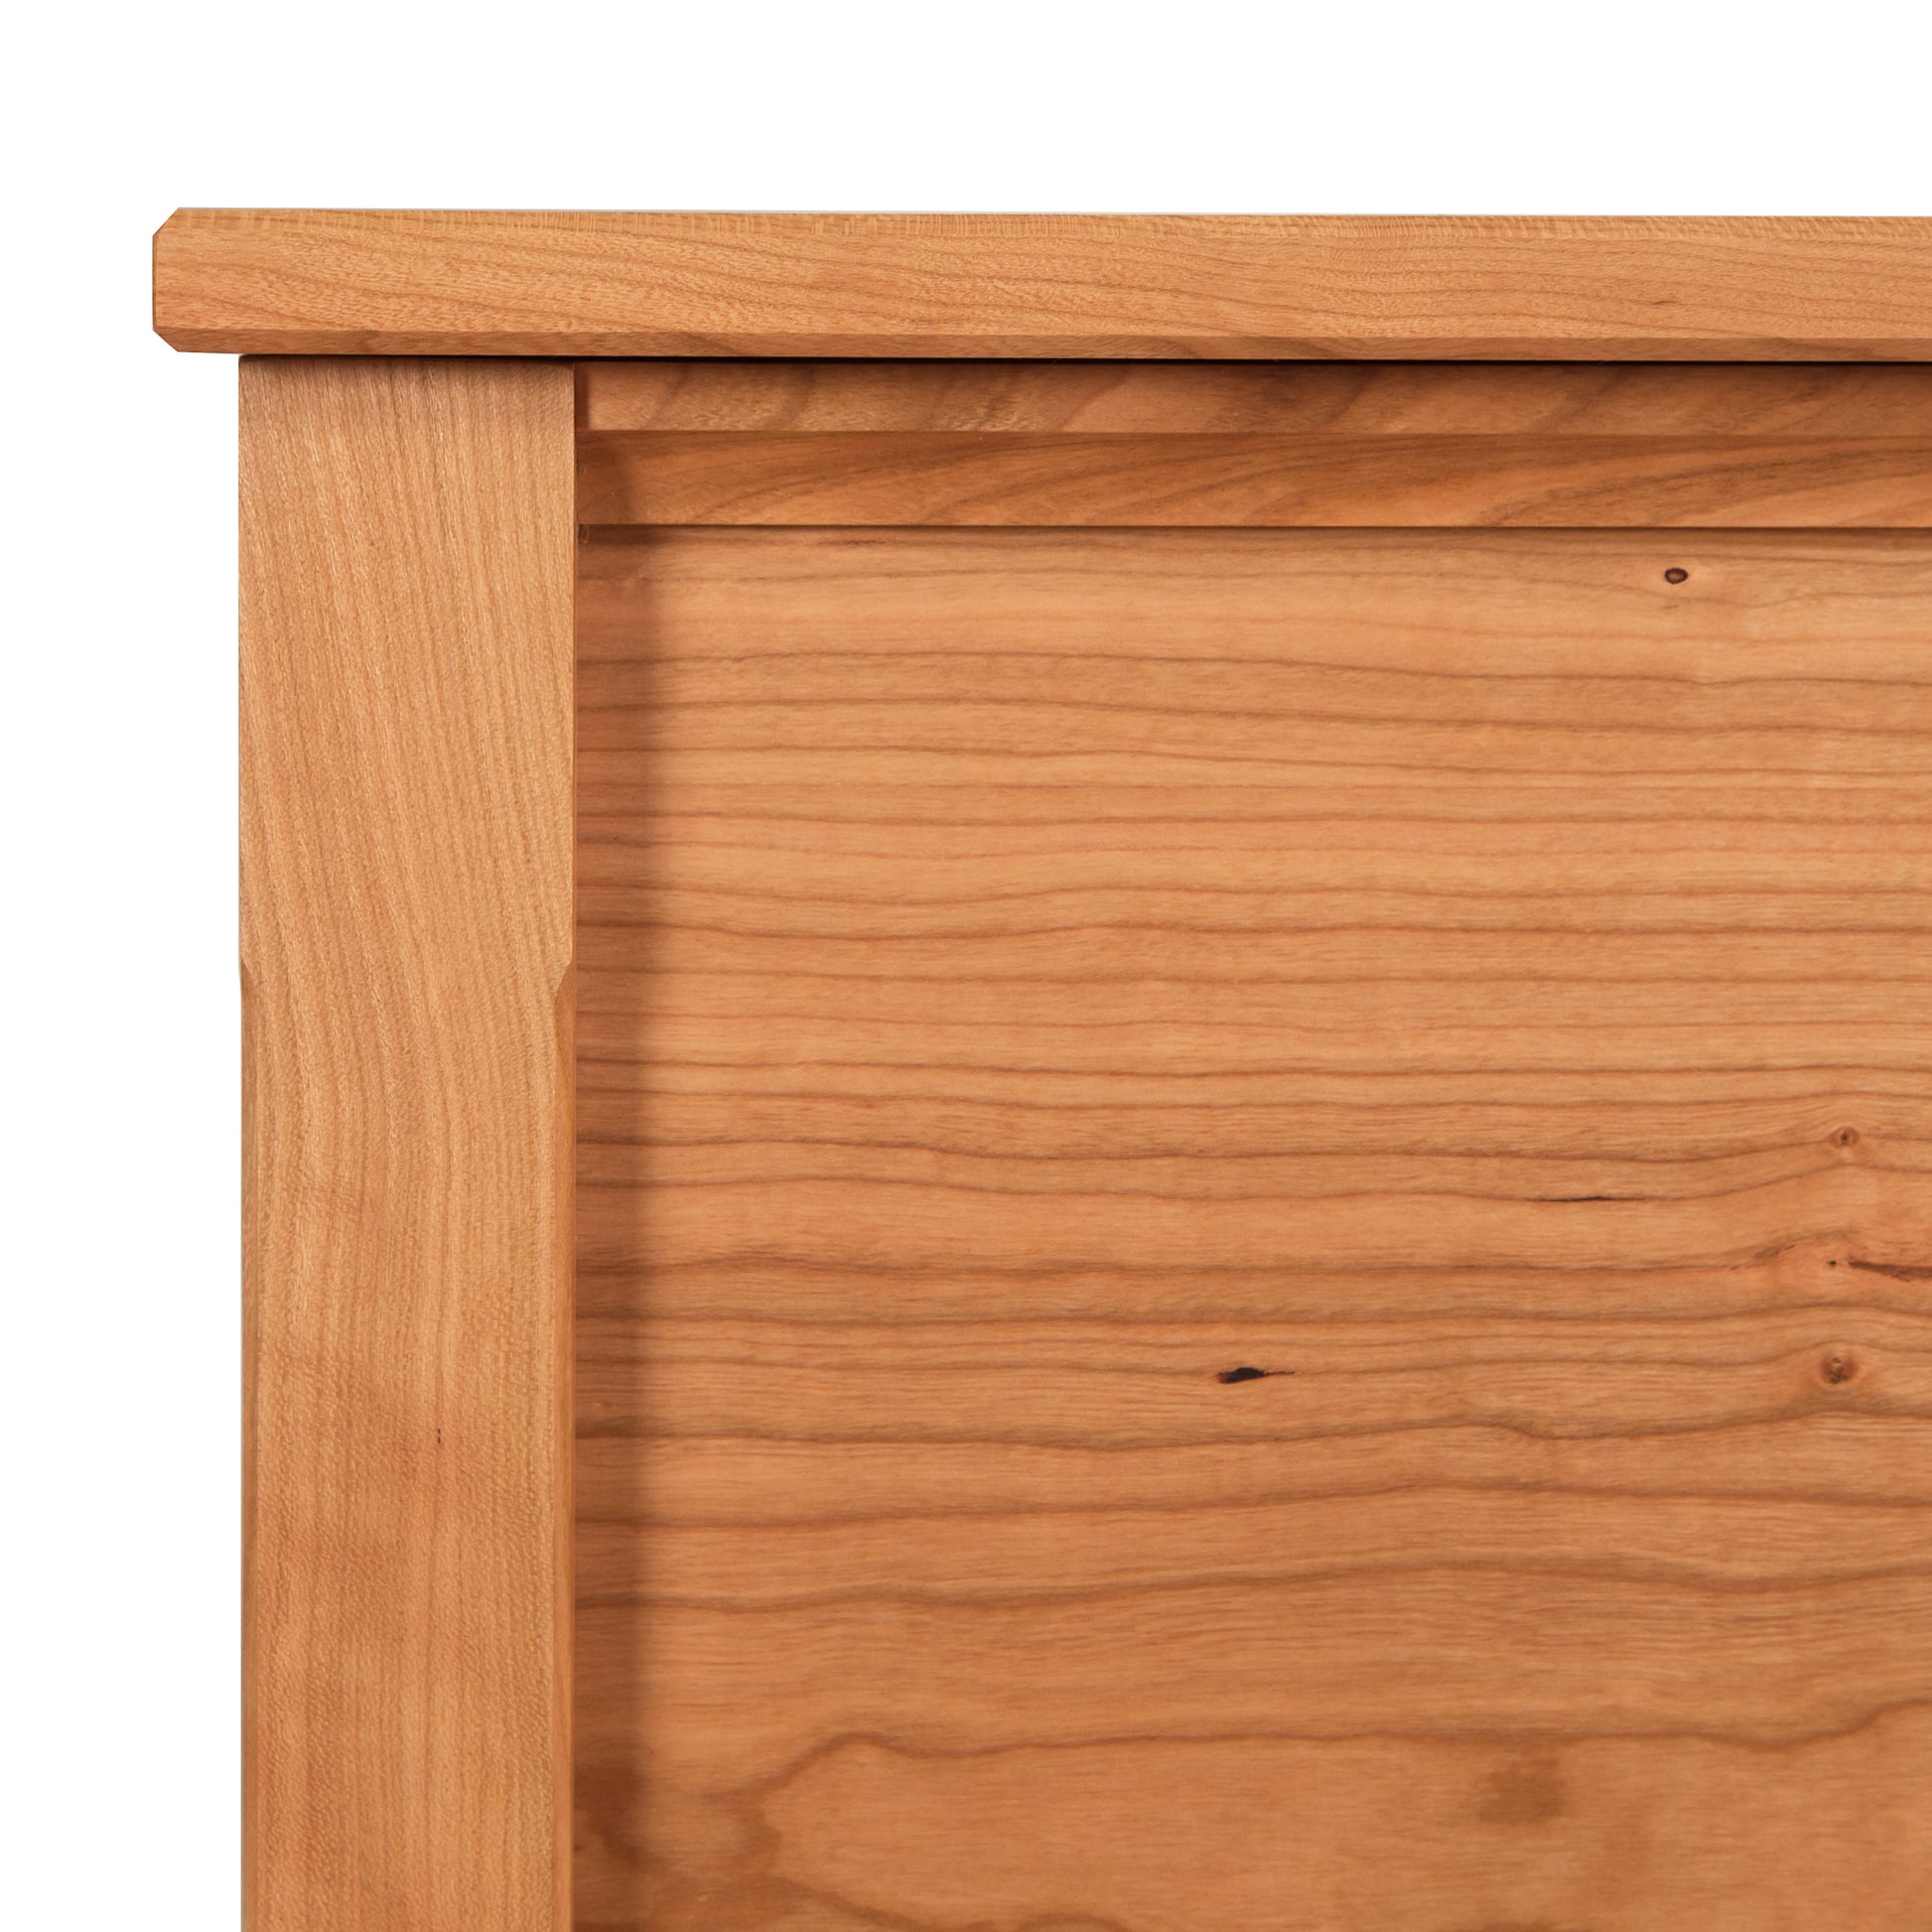 Close-up view of a wooden Maple Corner Woodworks Vermont Shaker Blanket Chest corner showing the detailed wood grain and joinery, with a lighter wood used for the front panel and a slightly darker tone for the frame.